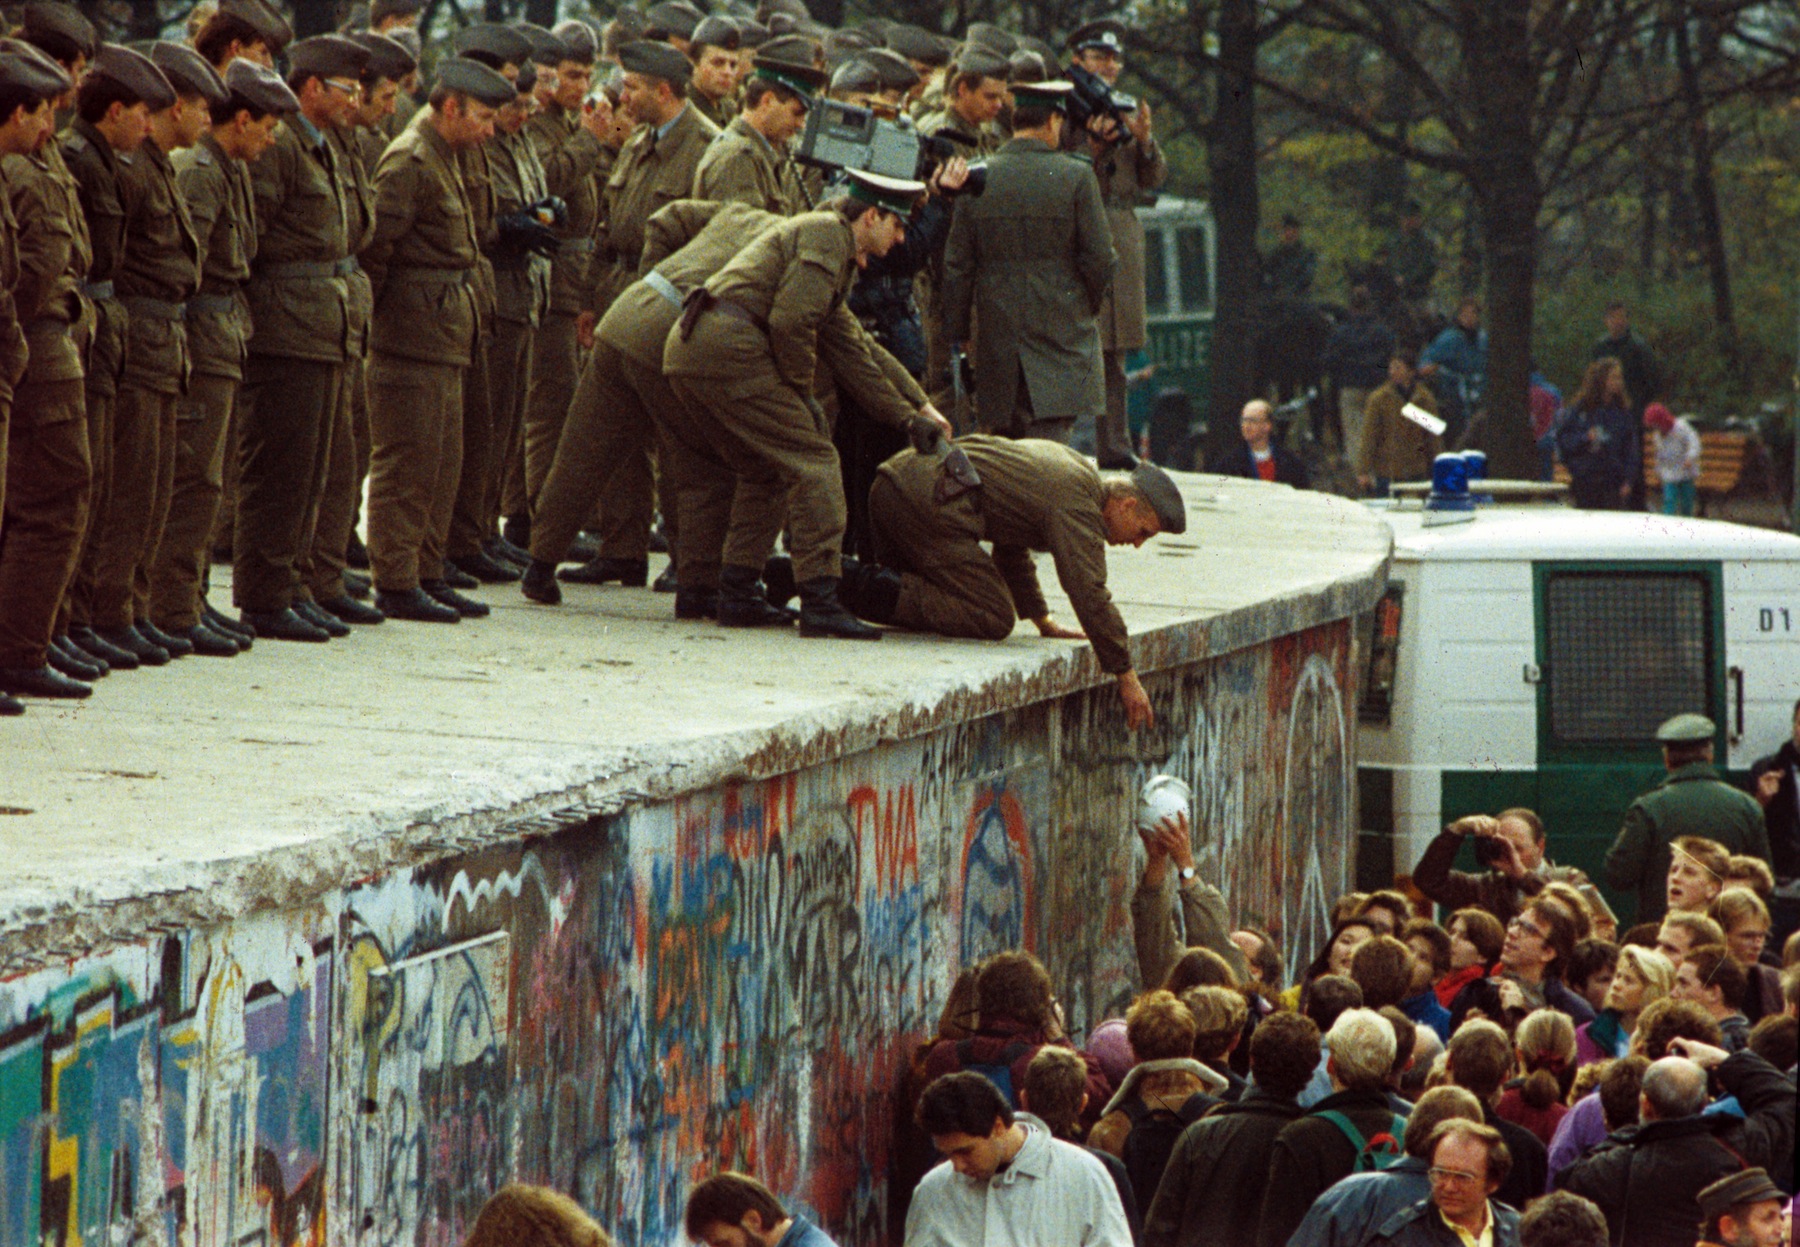 The Berlin Wall and the rise of nationalism